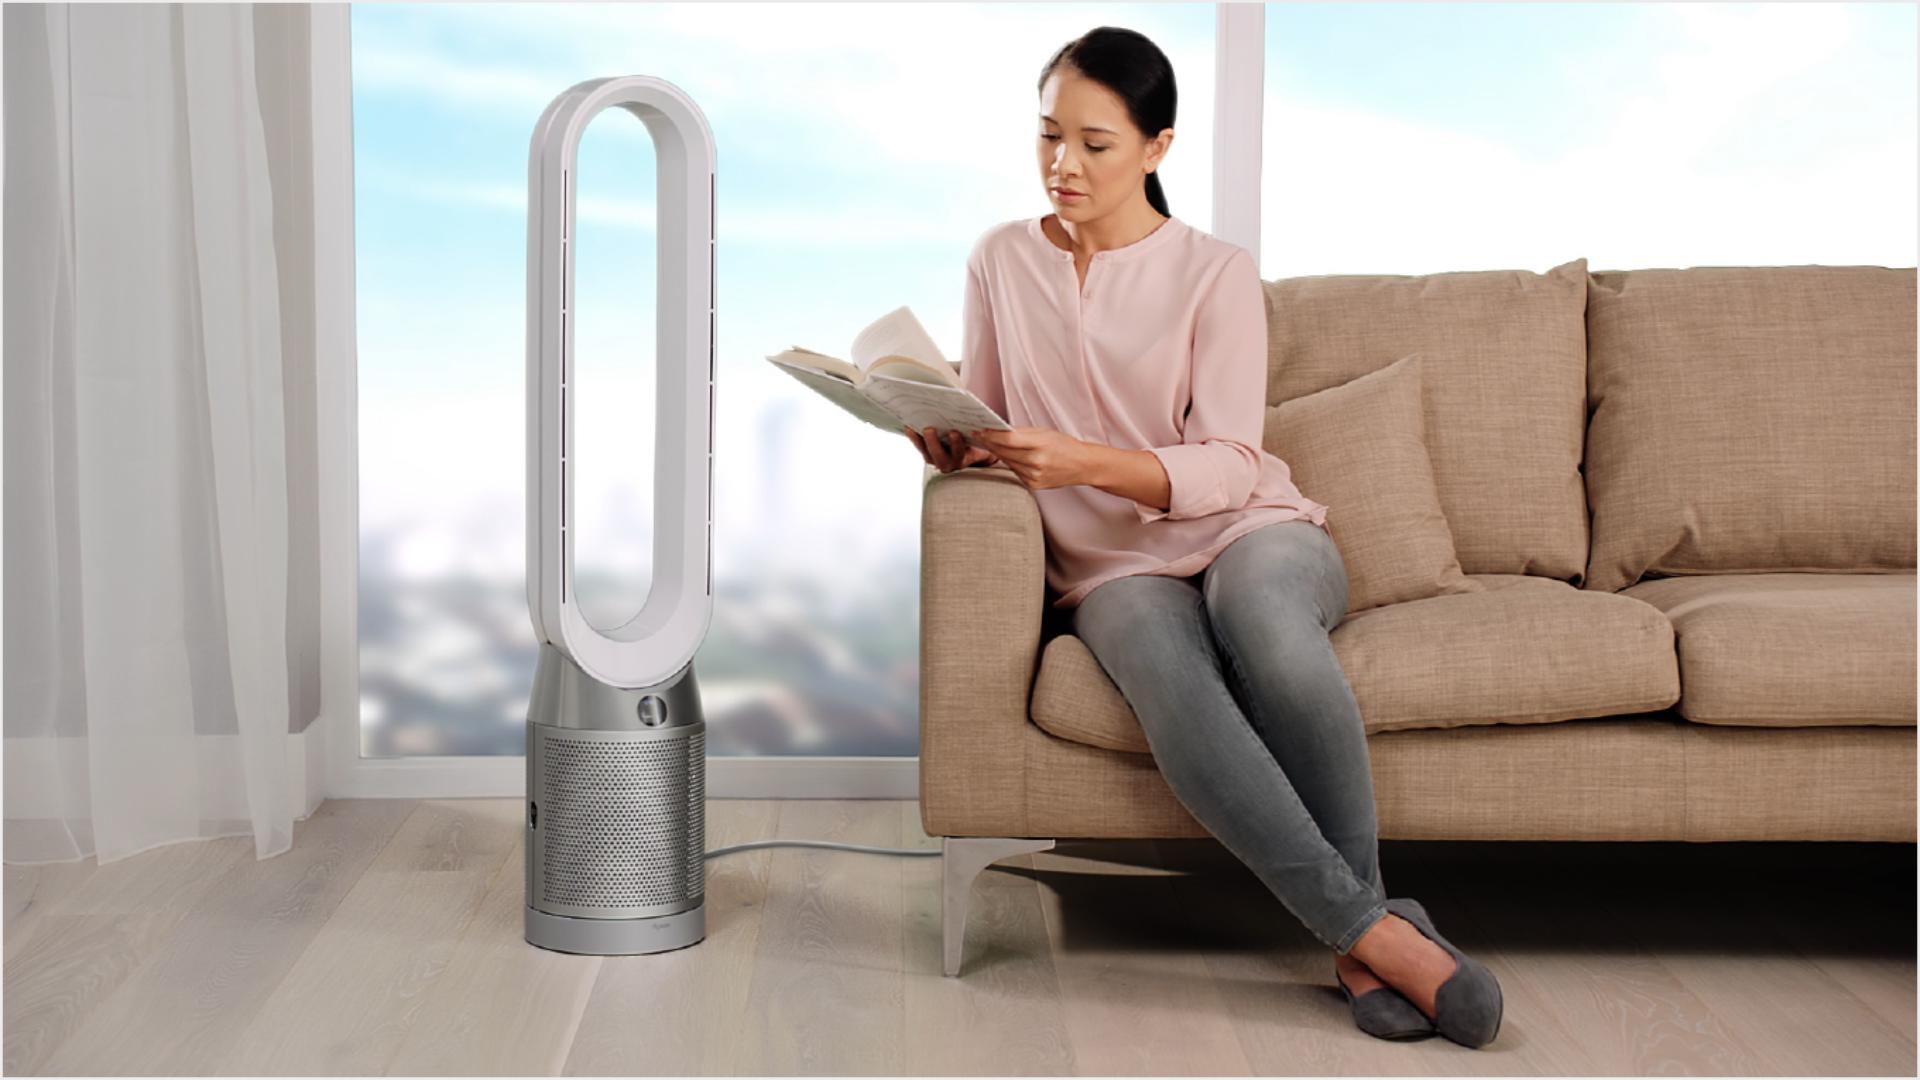 A woman on sofa adjusting the airflow of the purifier beside her.